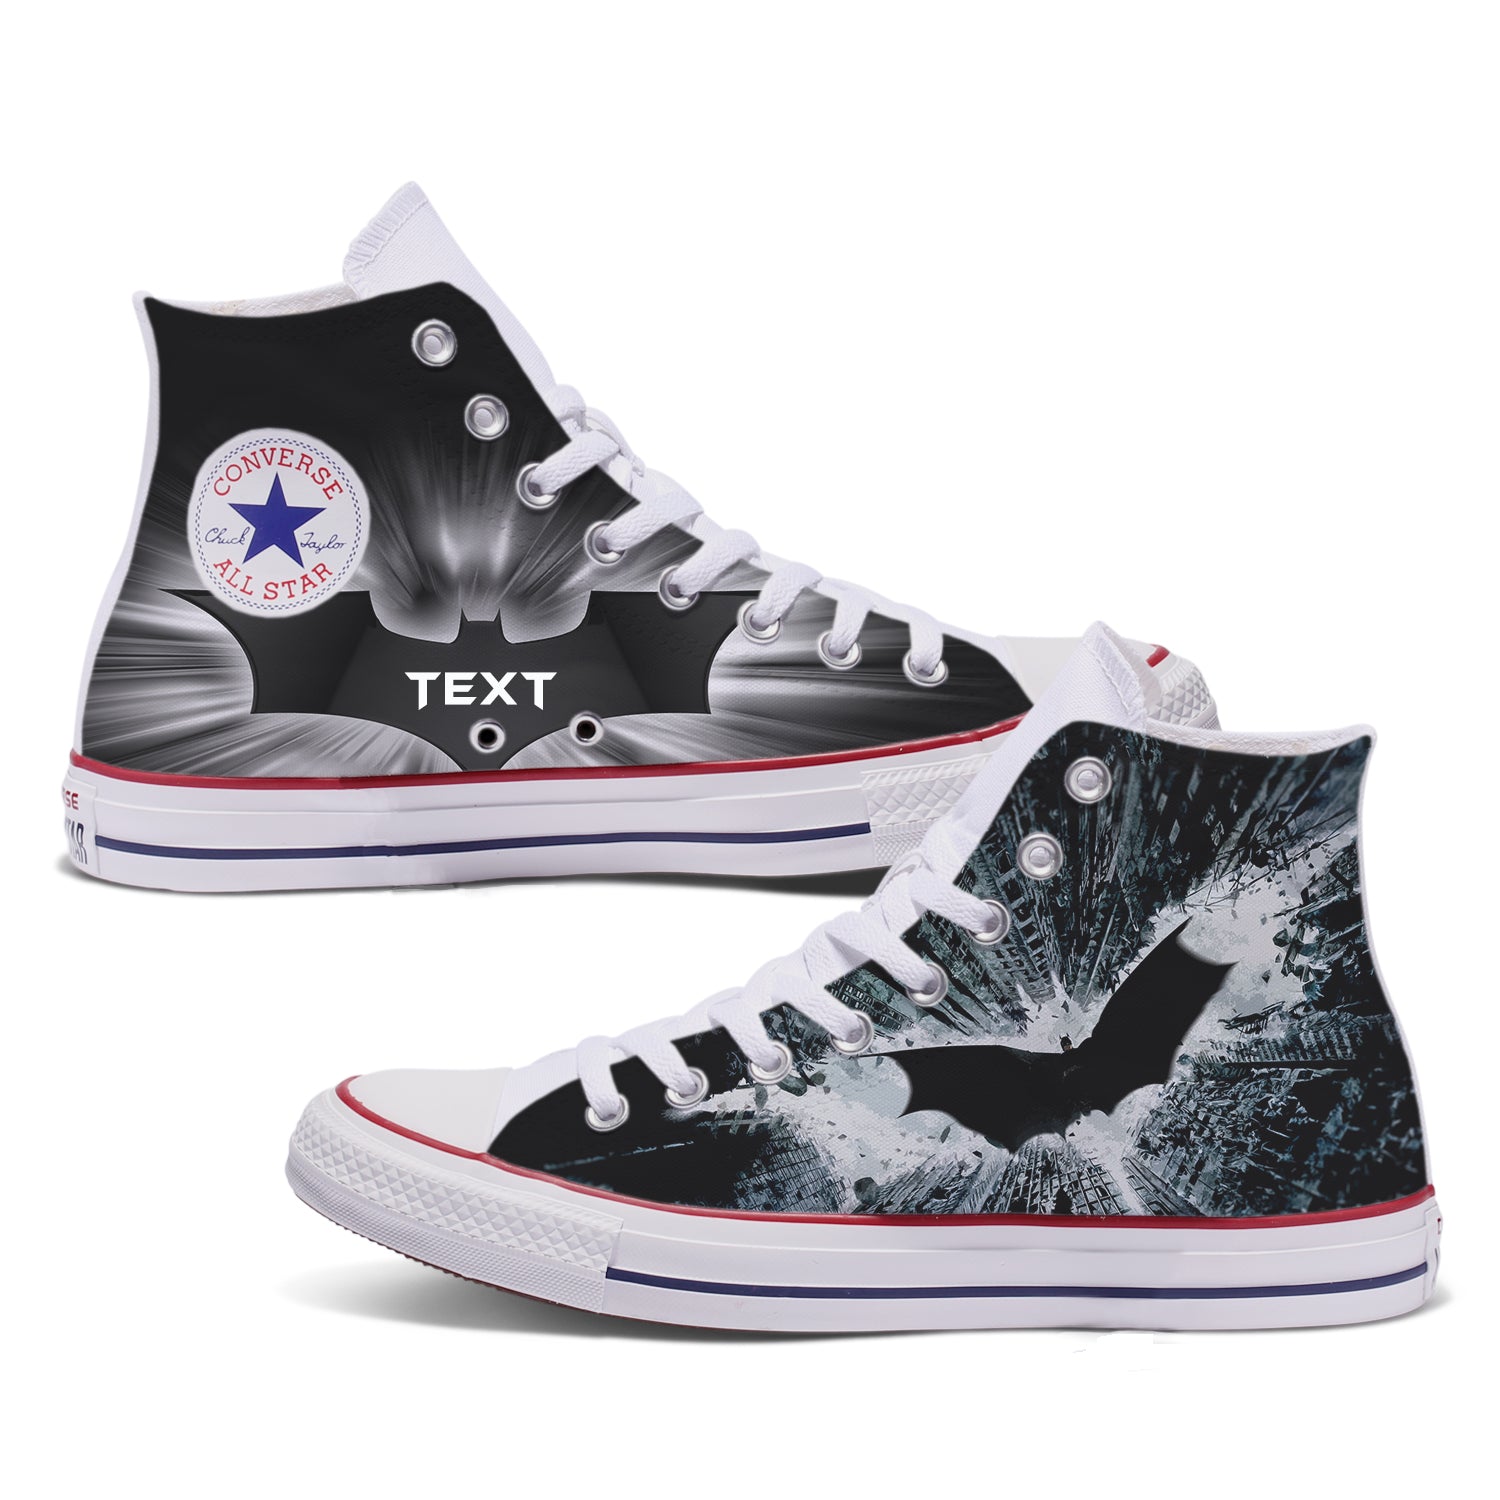 Converse By You  Design Your Own Custom Shoes.